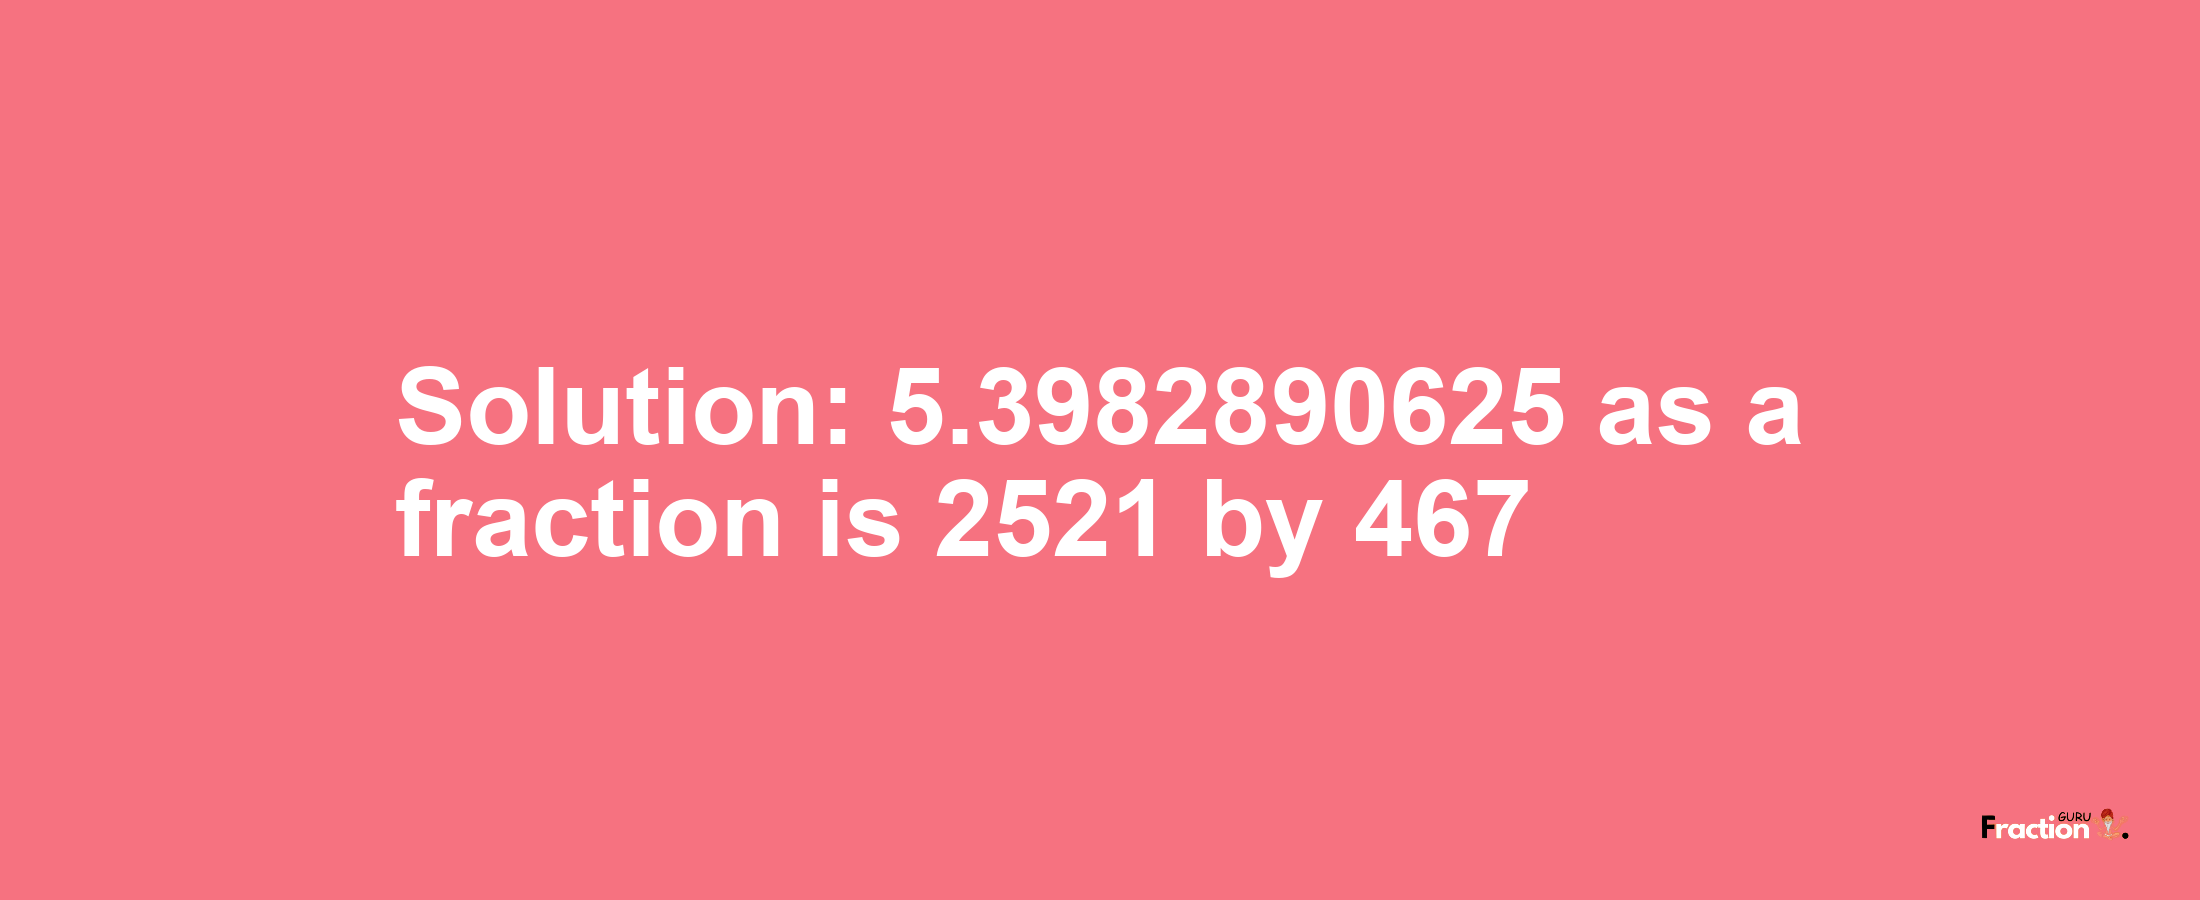 Solution:5.3982890625 as a fraction is 2521/467